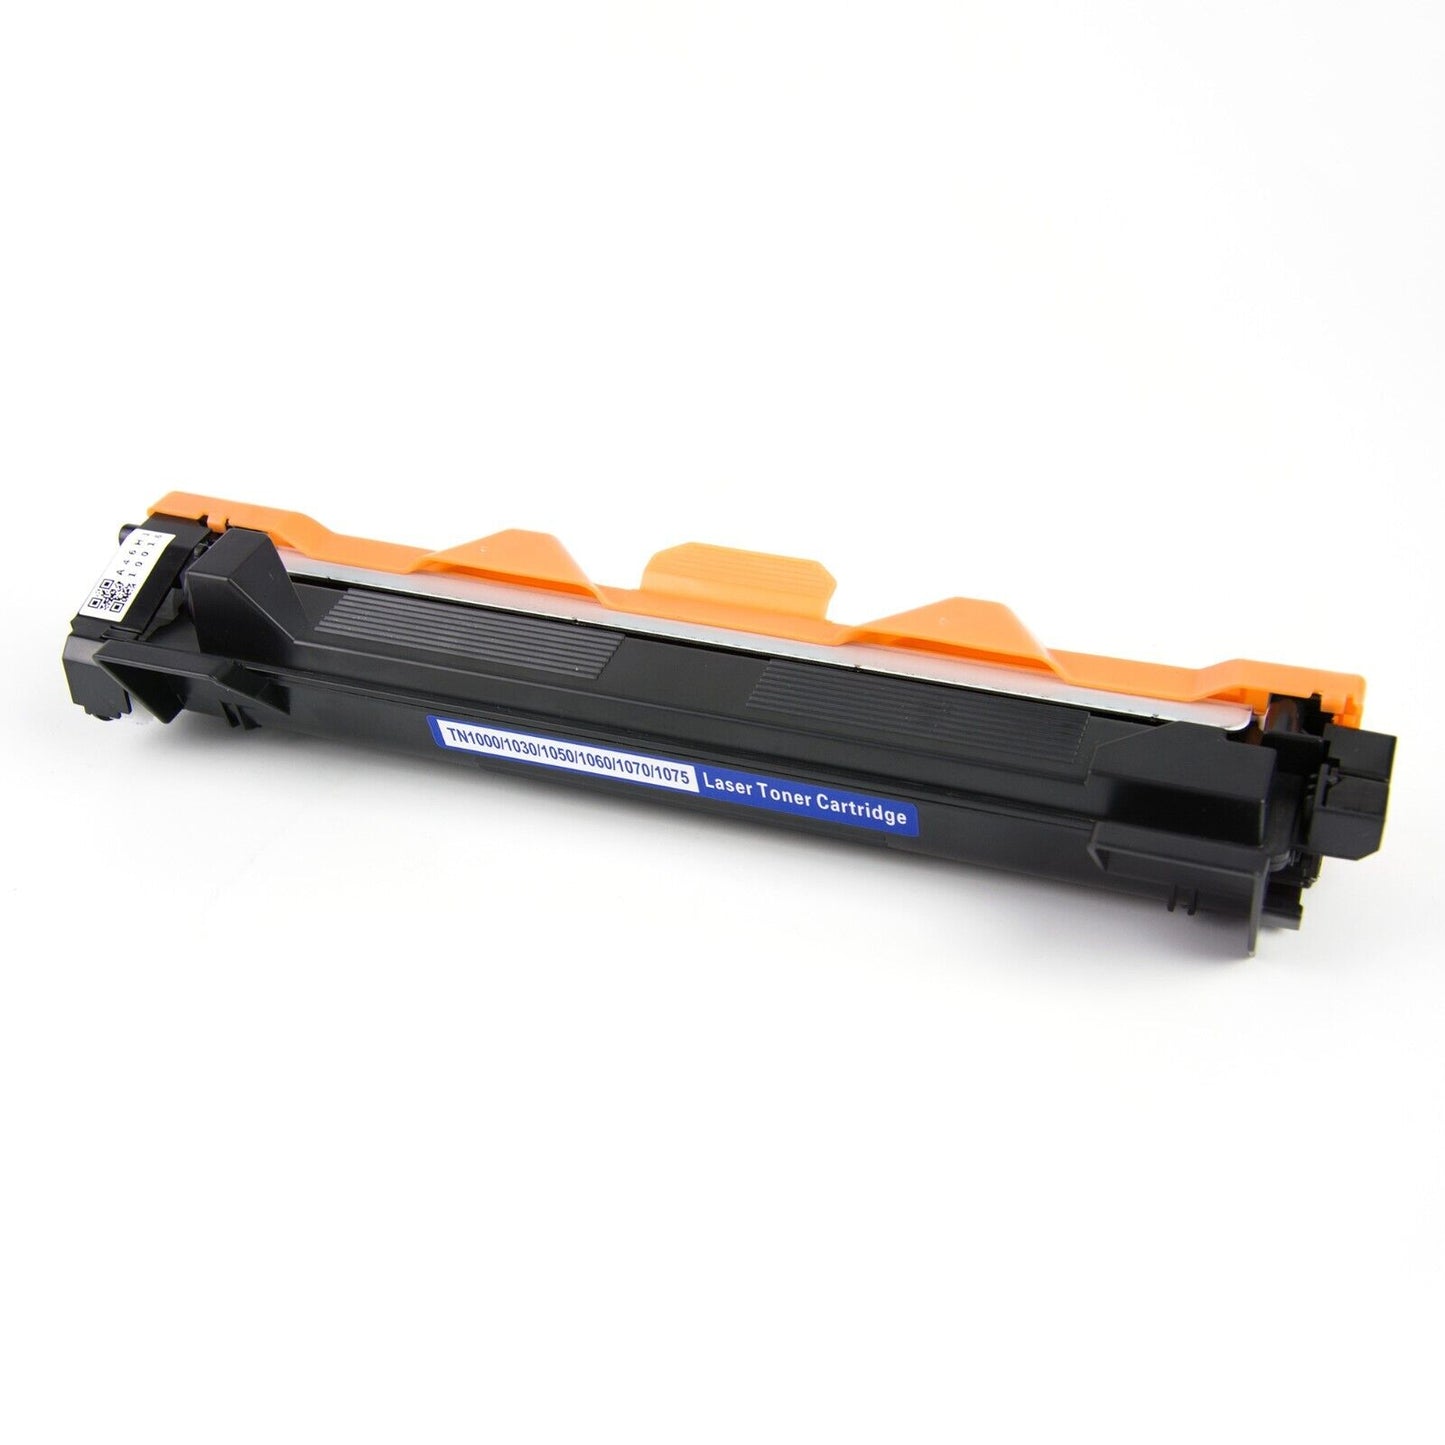 Brother TN1070 Toner Cartridge Yield 1000 pages Black